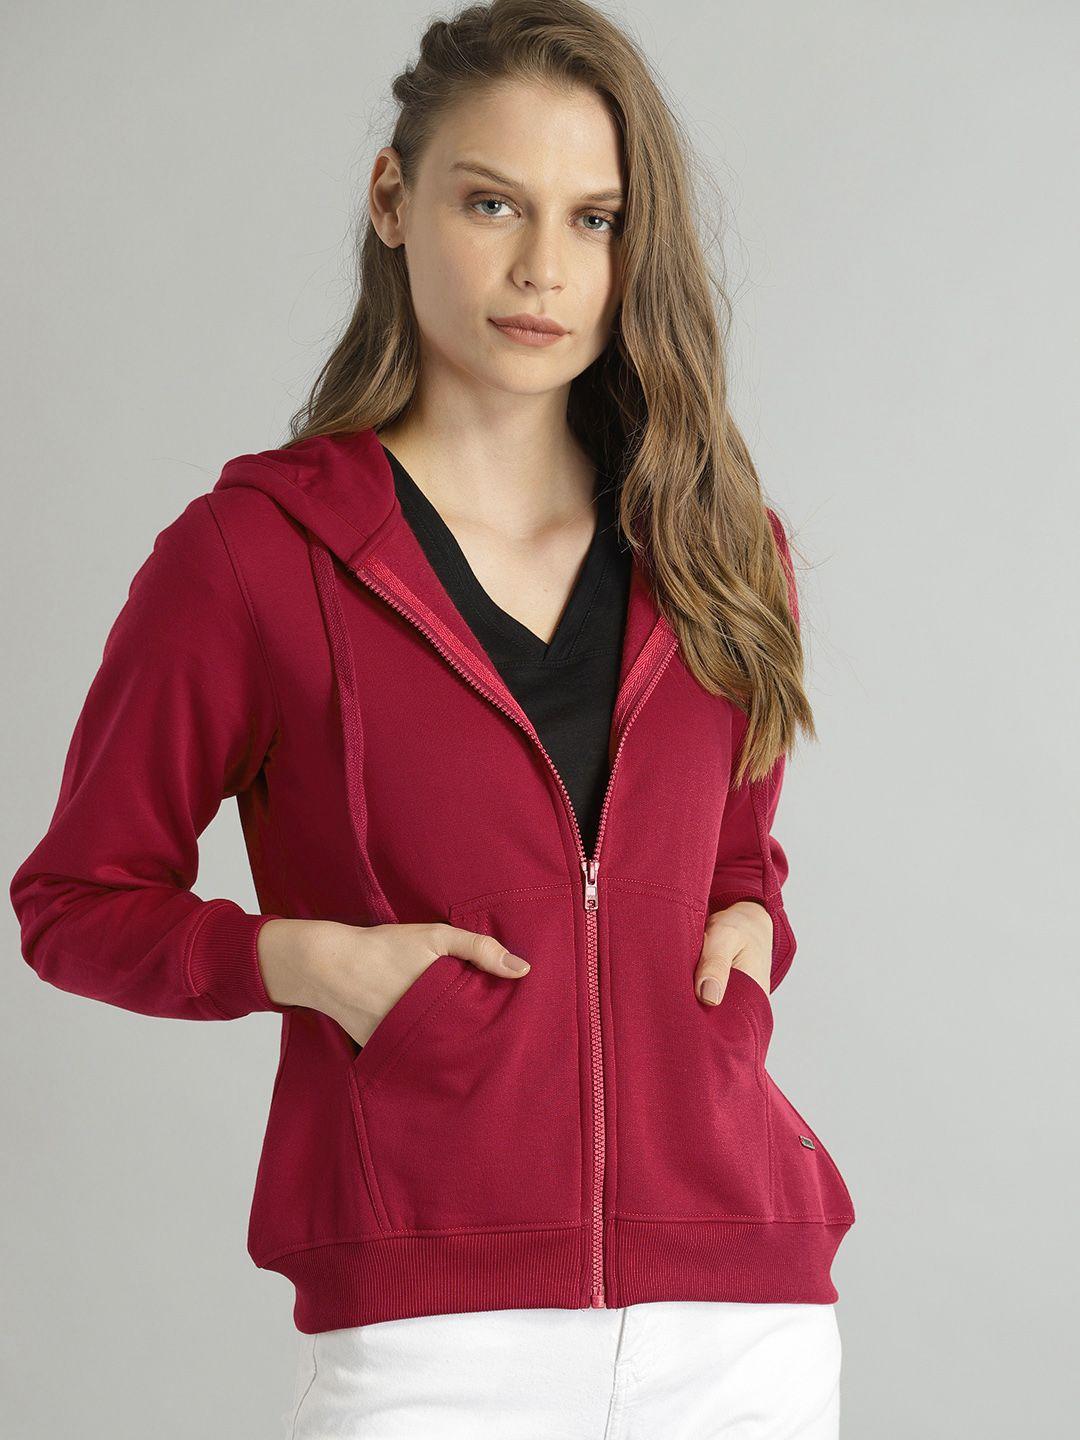 the roadster lifestyle co women magenta pink solid hooded sweatshirt